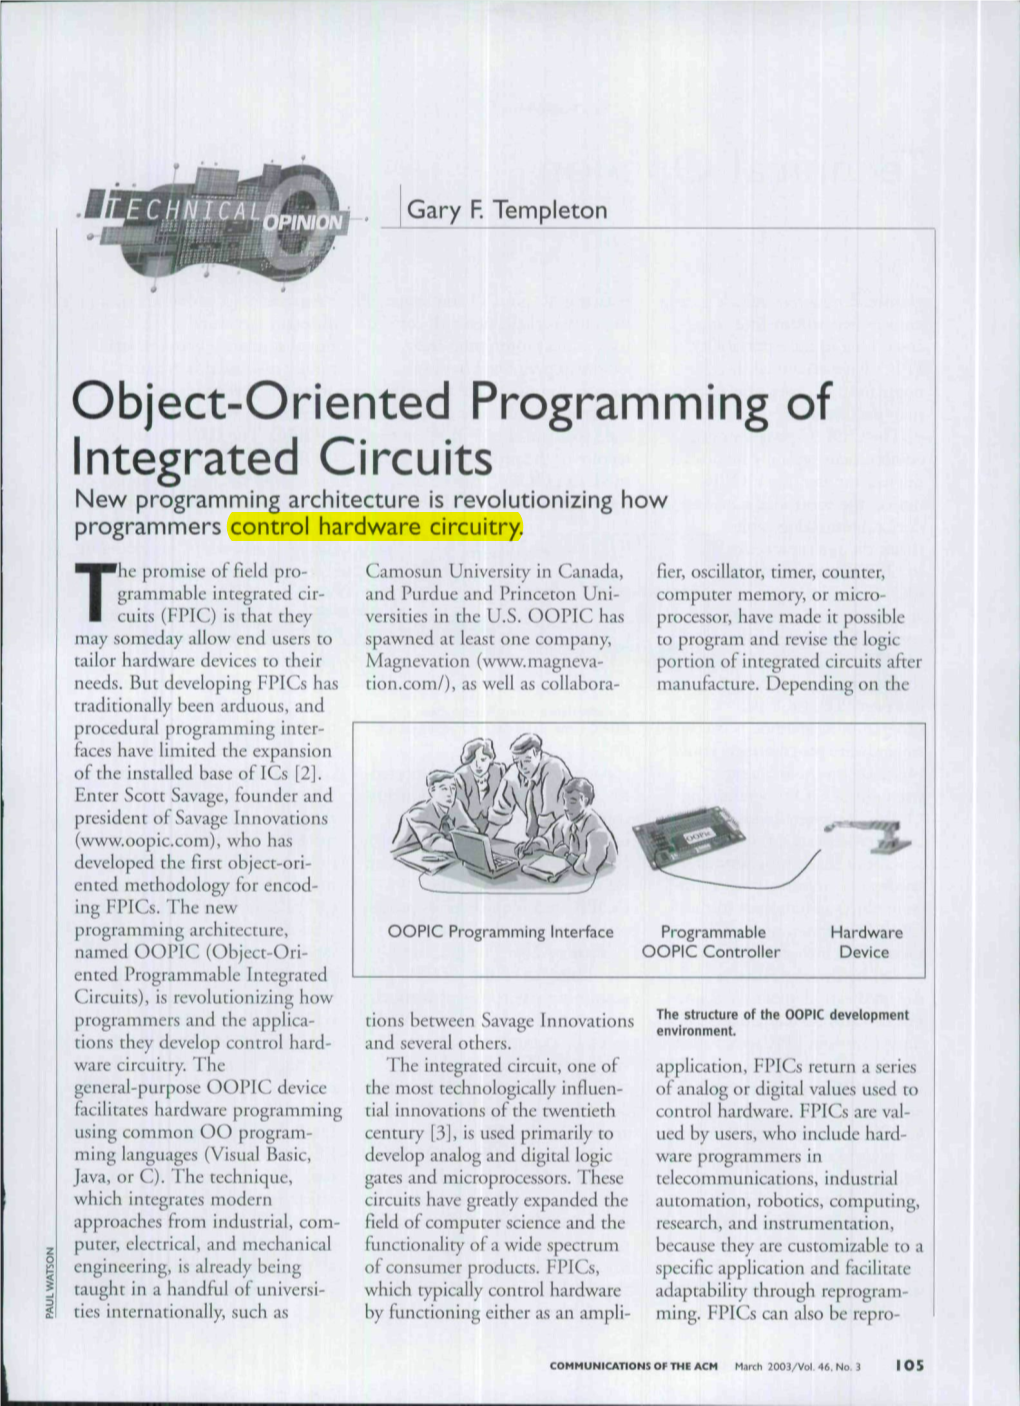 Object-Oriented Programming of Integrated Circuits New Programming Architecture Is Revolutionizing How Programmers Control Hardware Circuitry